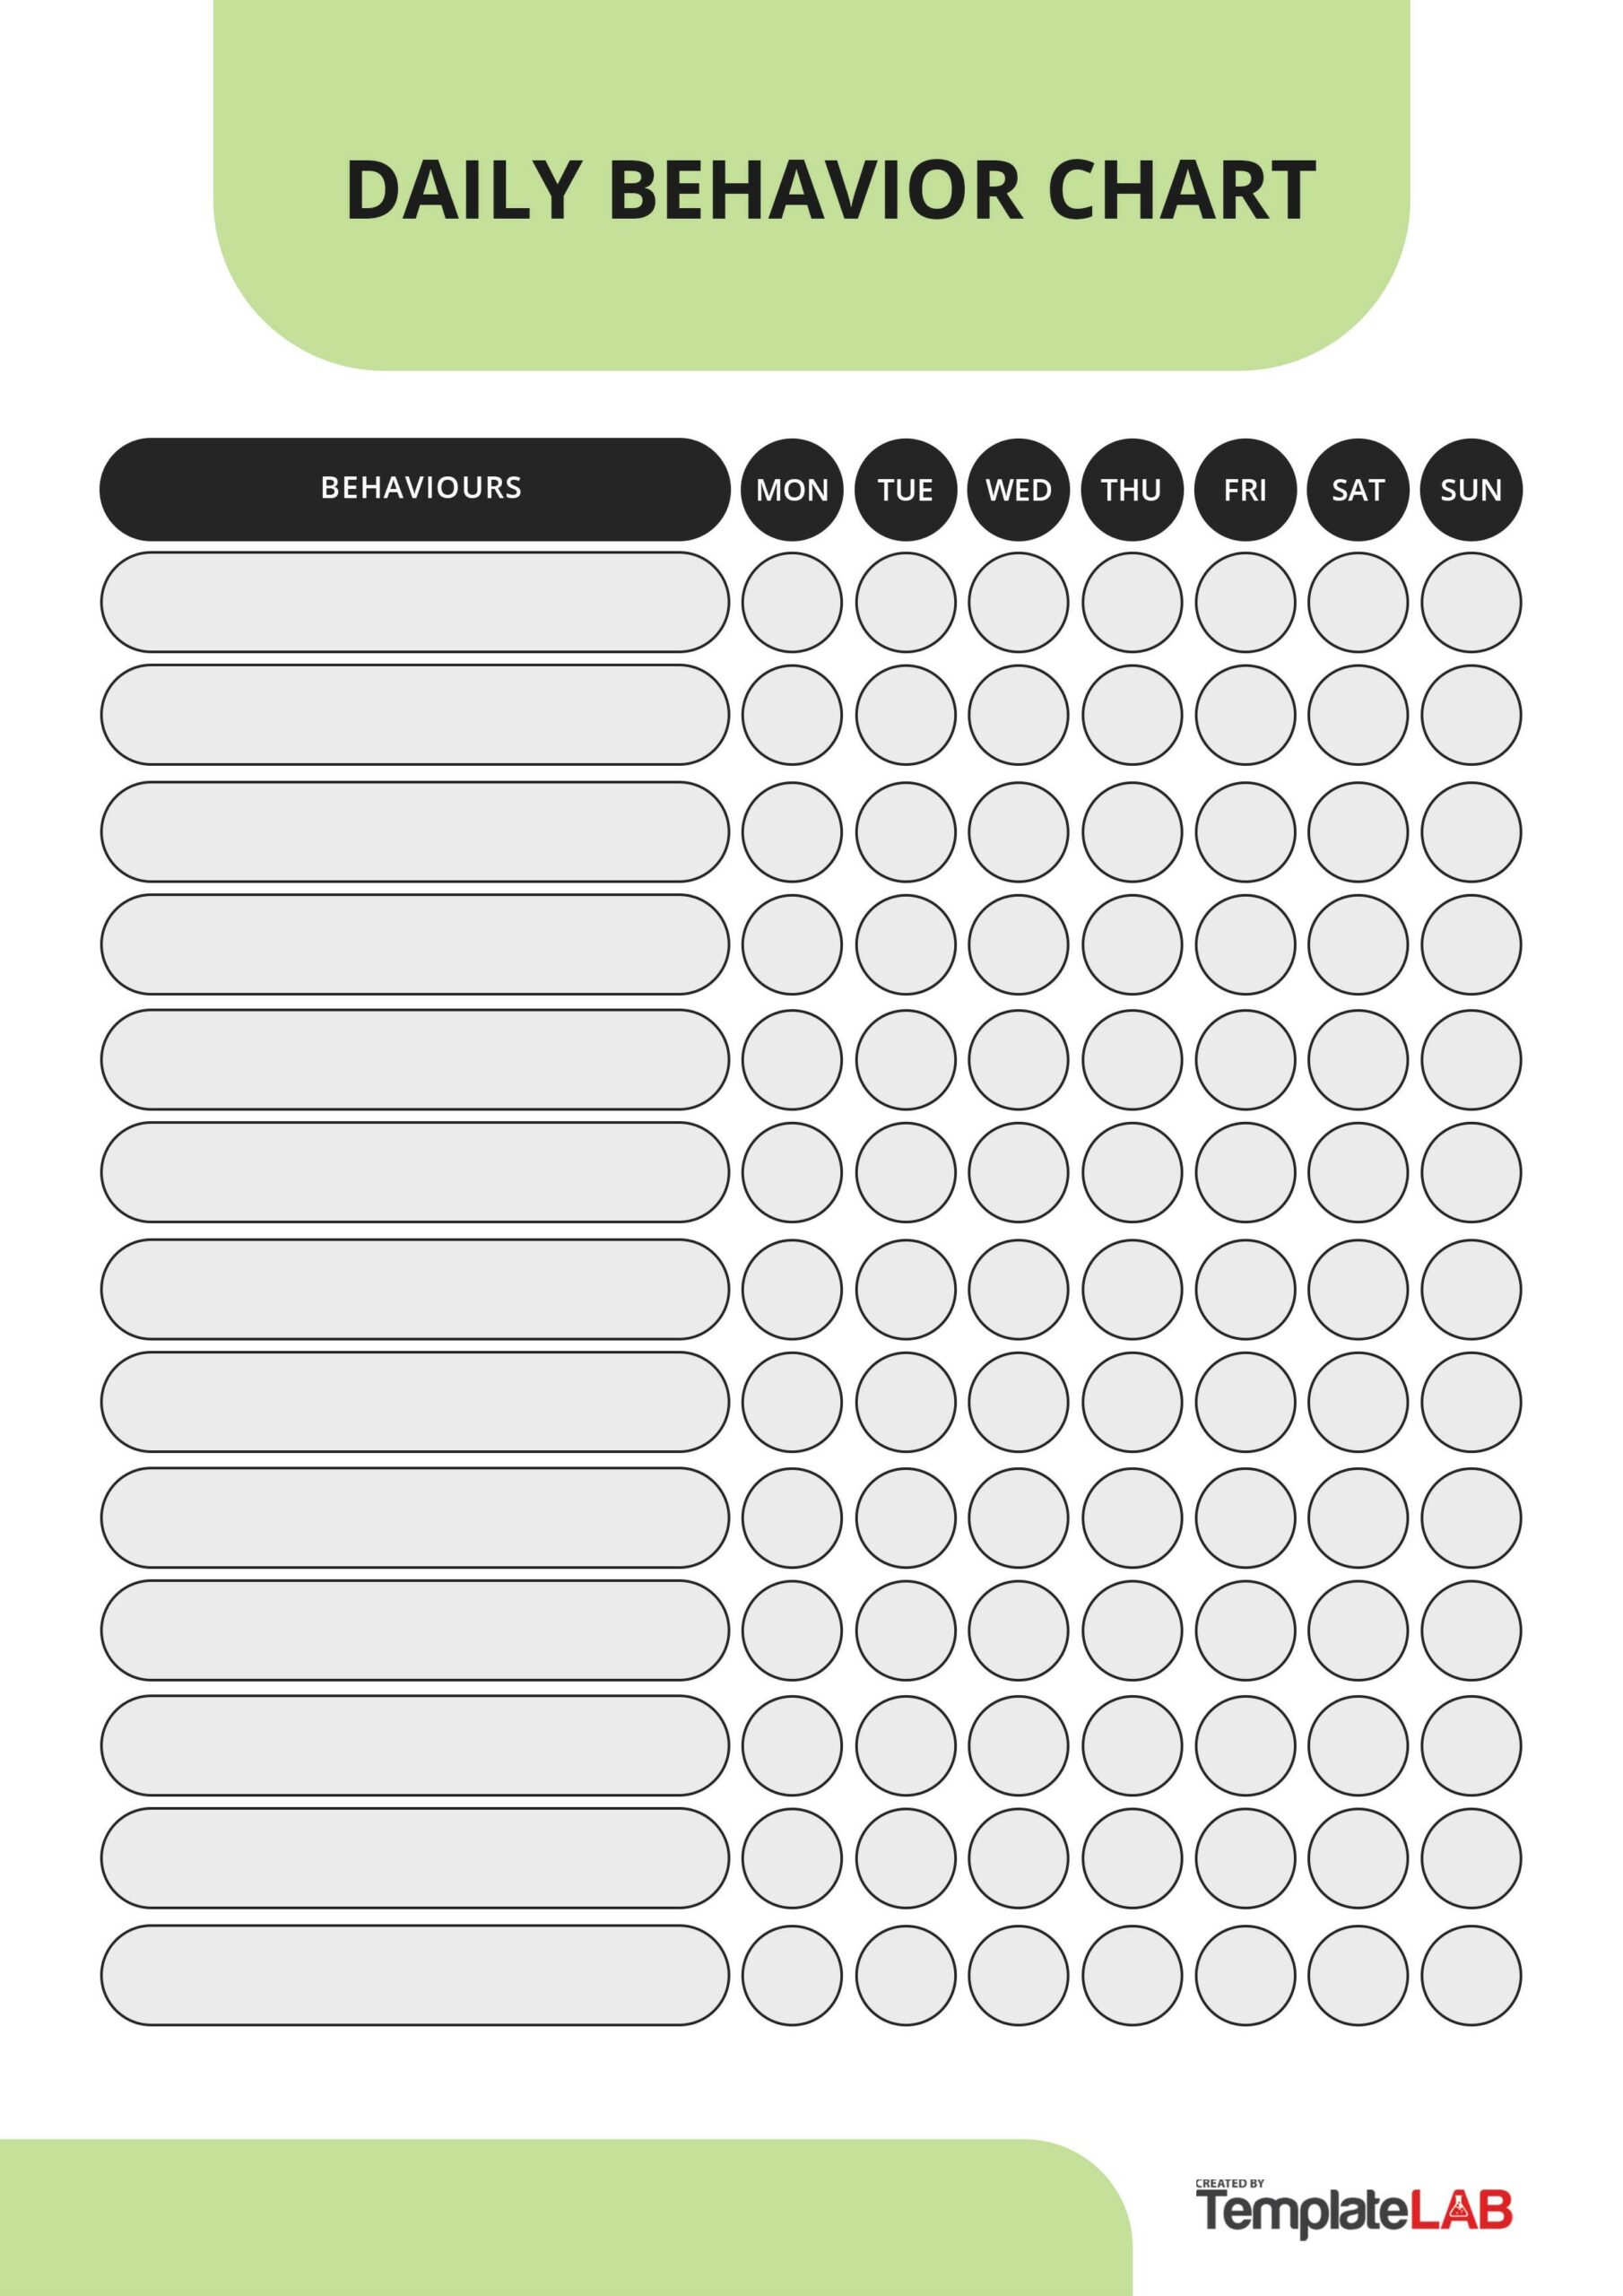 behavior-frequency-chart-template